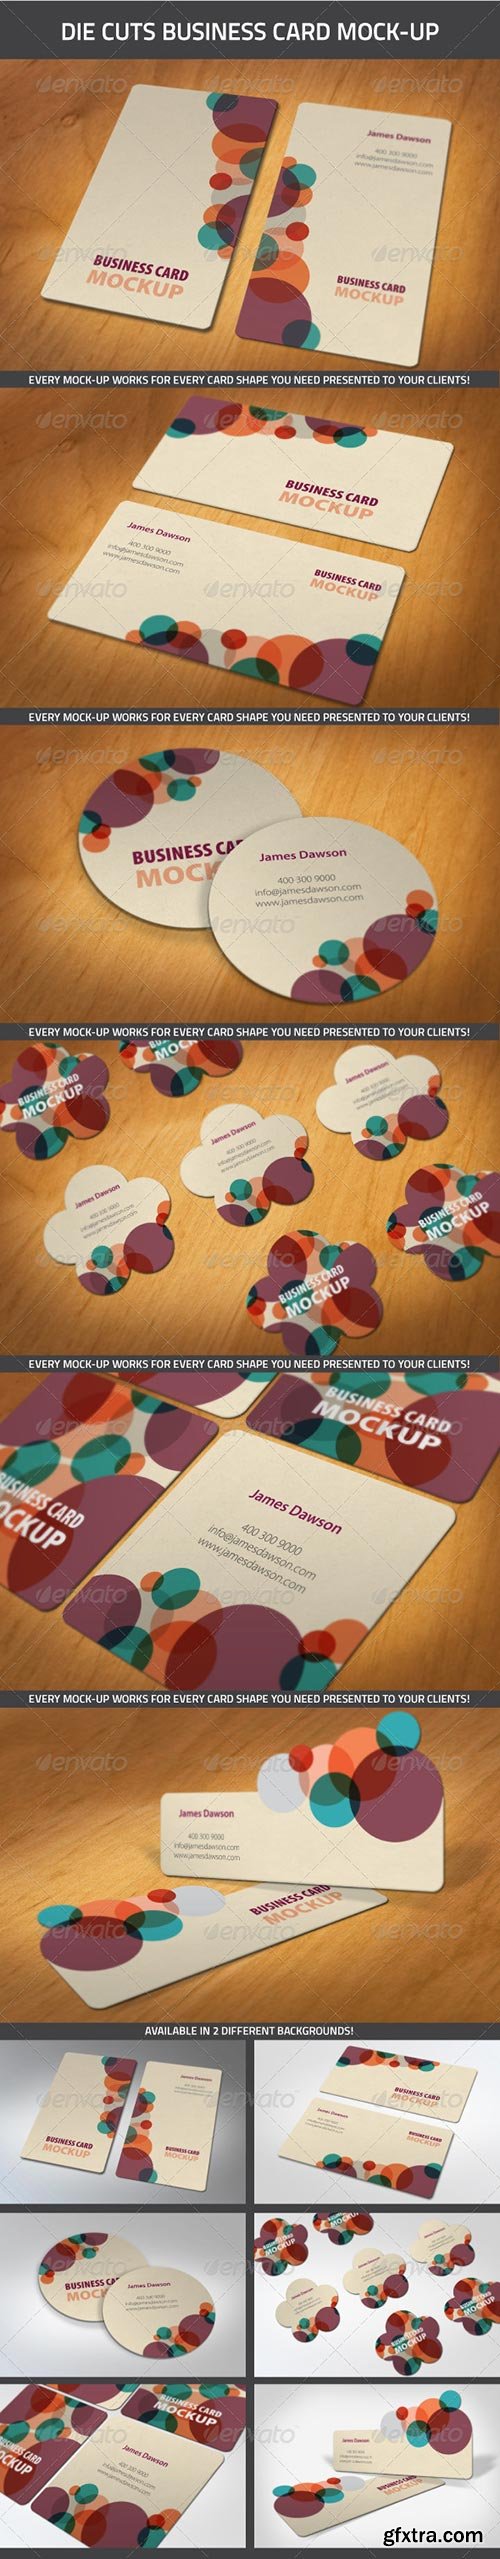 Graphicriver - Die-Cut Business Card Mock-Ups 4483191